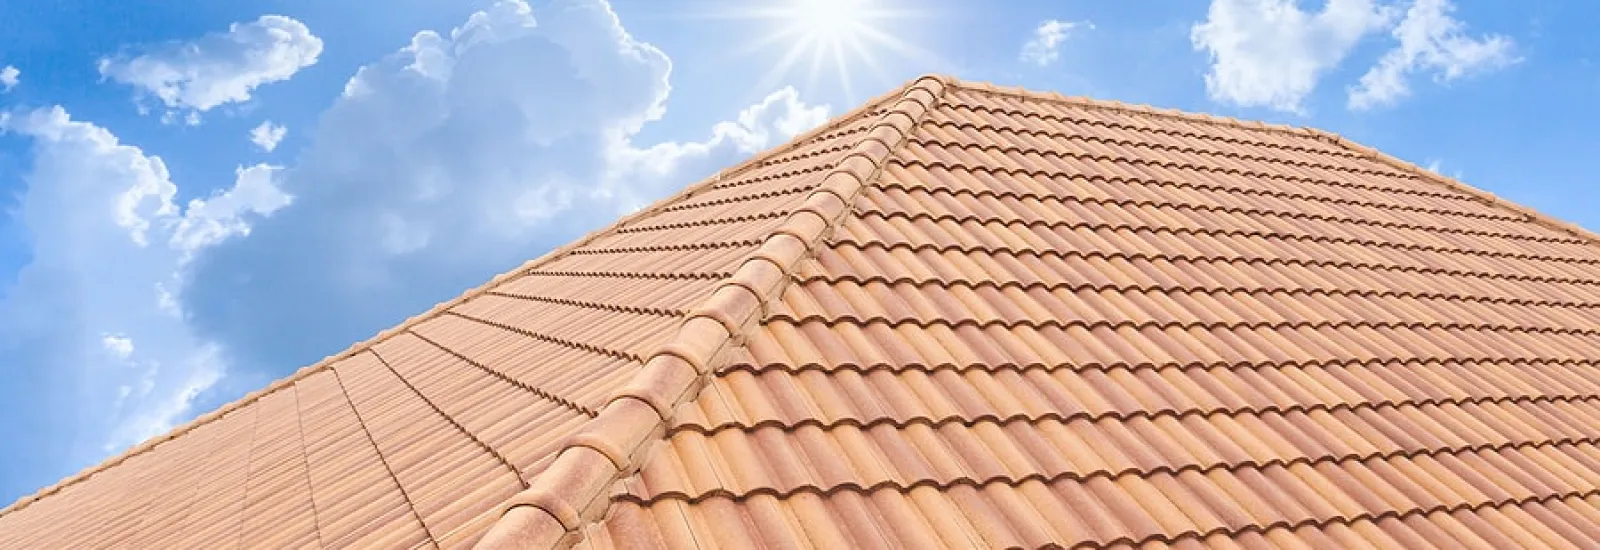 How Long Do Roofs Last in Florida? By Type